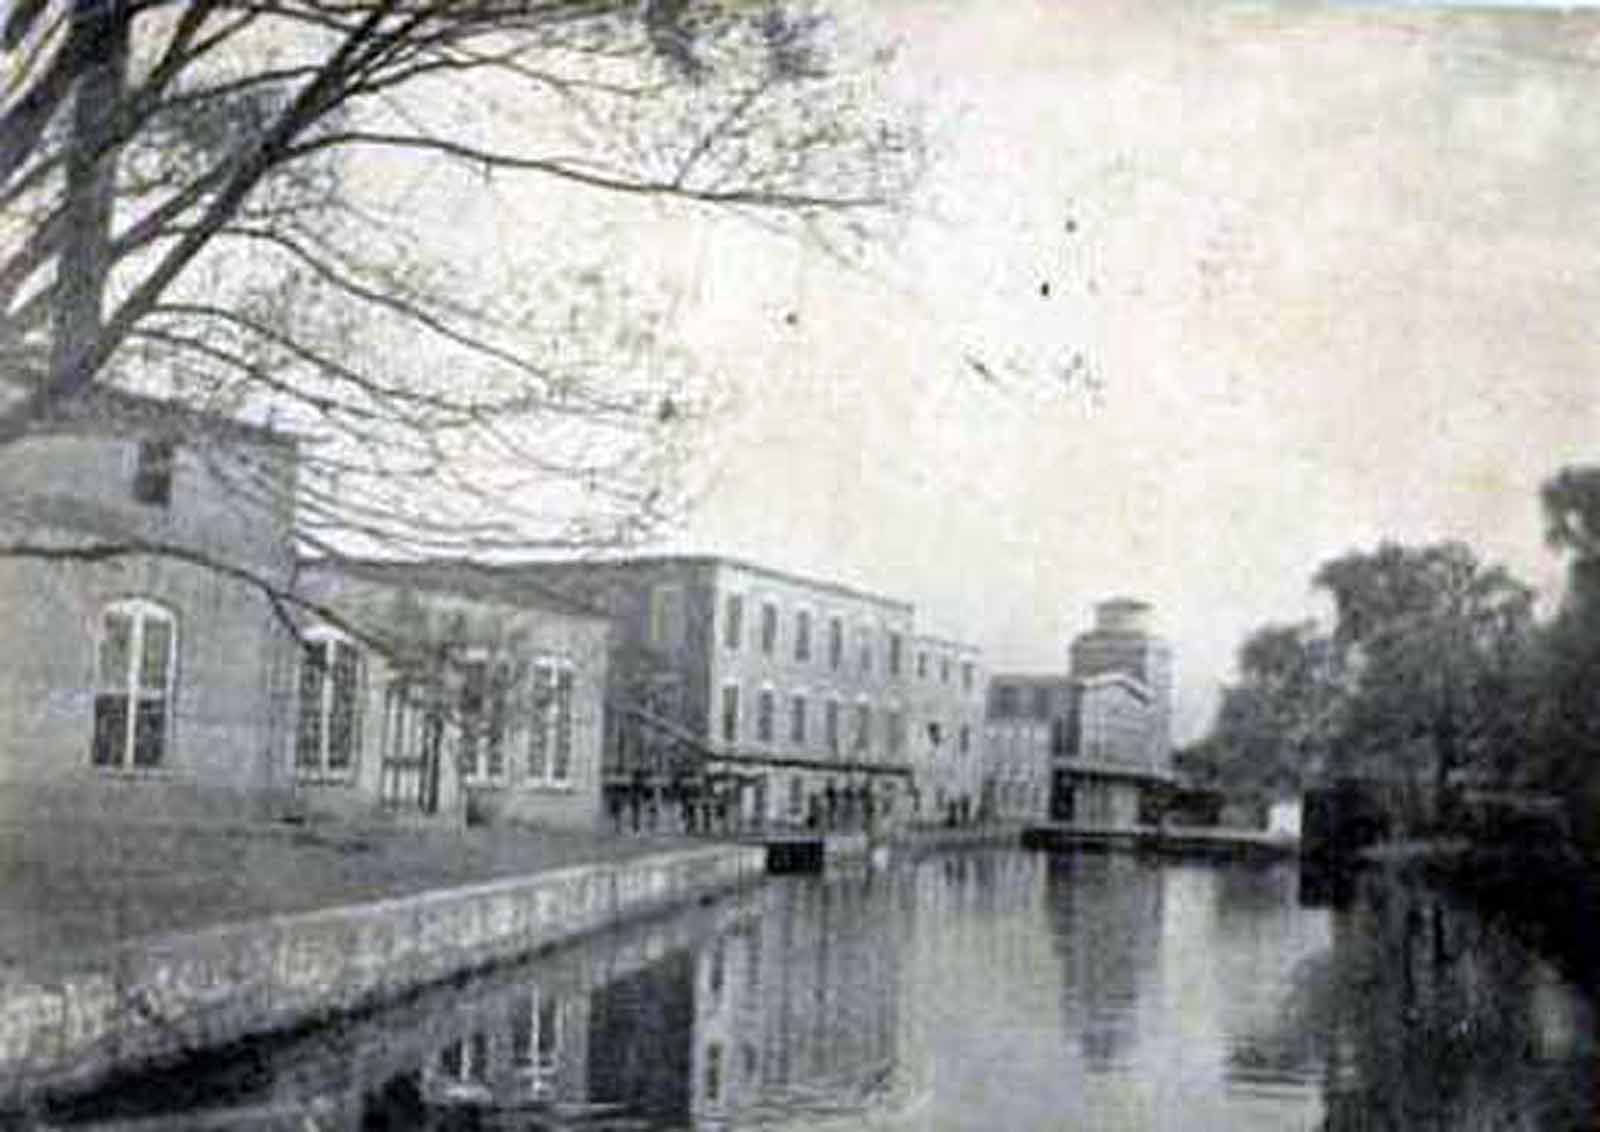 Mays Landing - Cotton Mill - 1910 or so